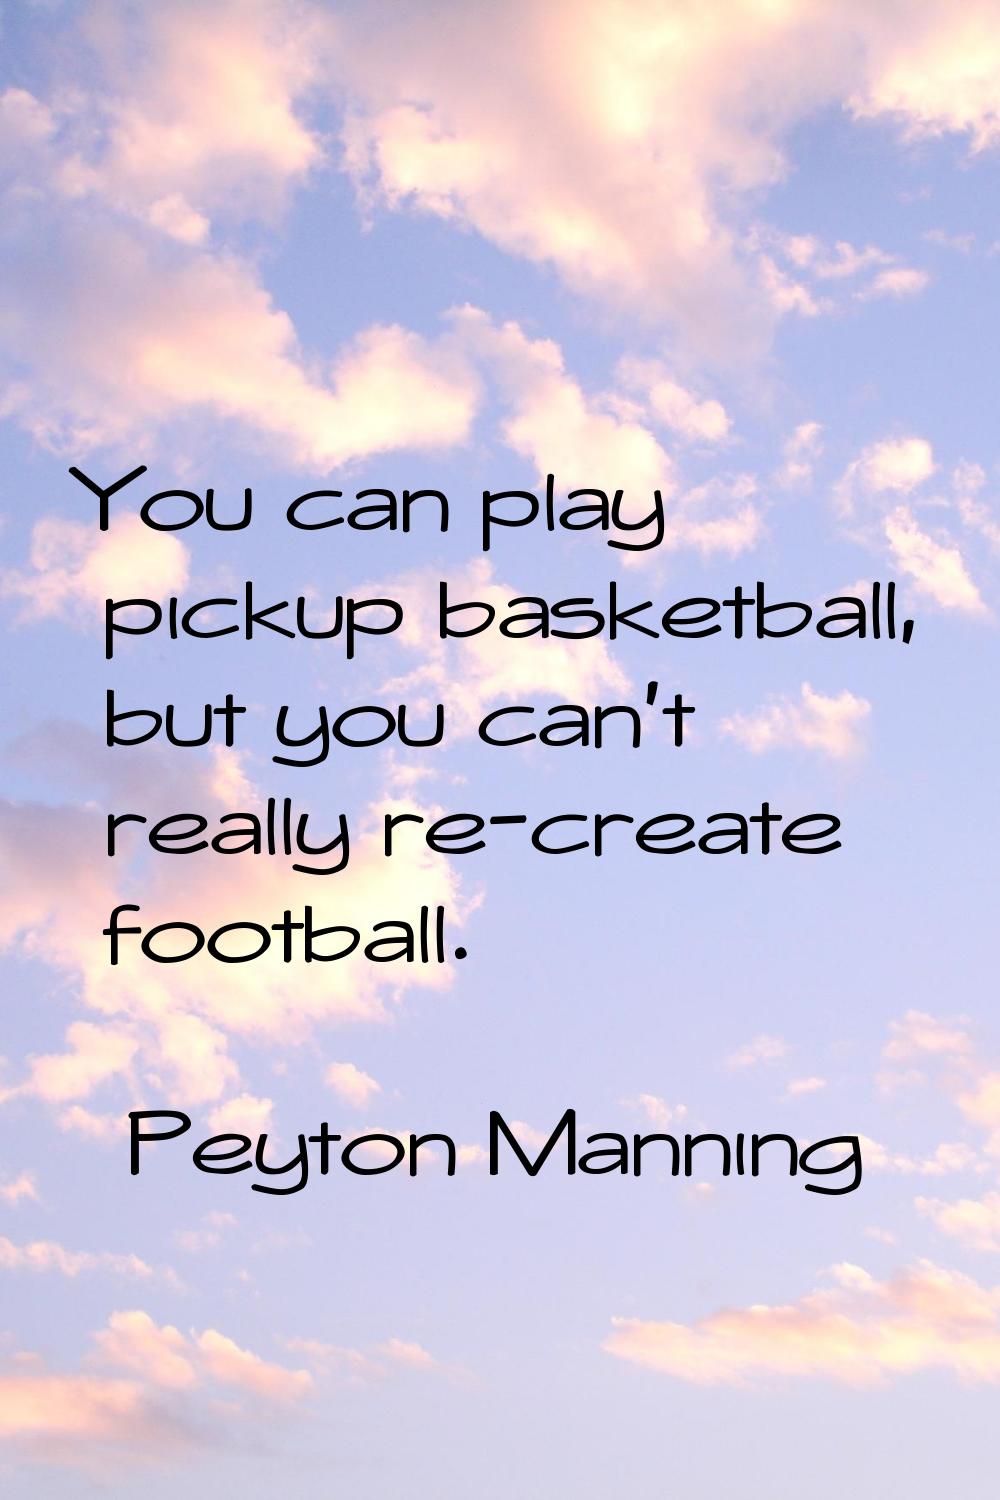 You can play pickup basketball, but you can't really re-create football.